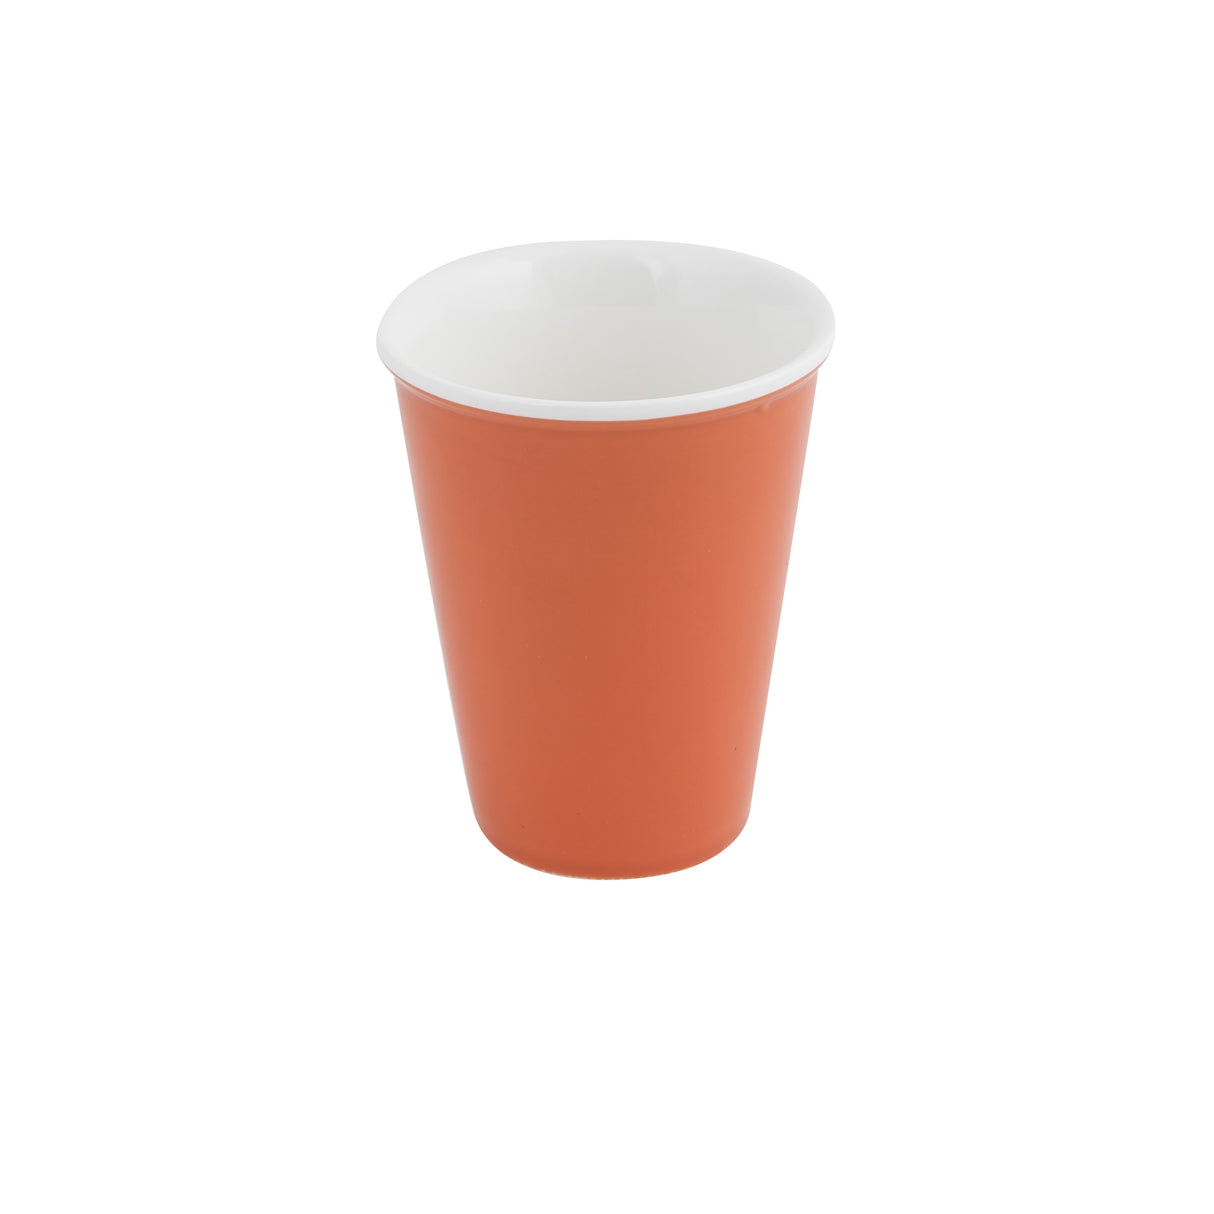 Latte Cup - Jaffa, 200ml from Bevande. made out of Porcelain and sold in boxes of 6. Hospitality quality at wholesale price with The Flying Fork! 